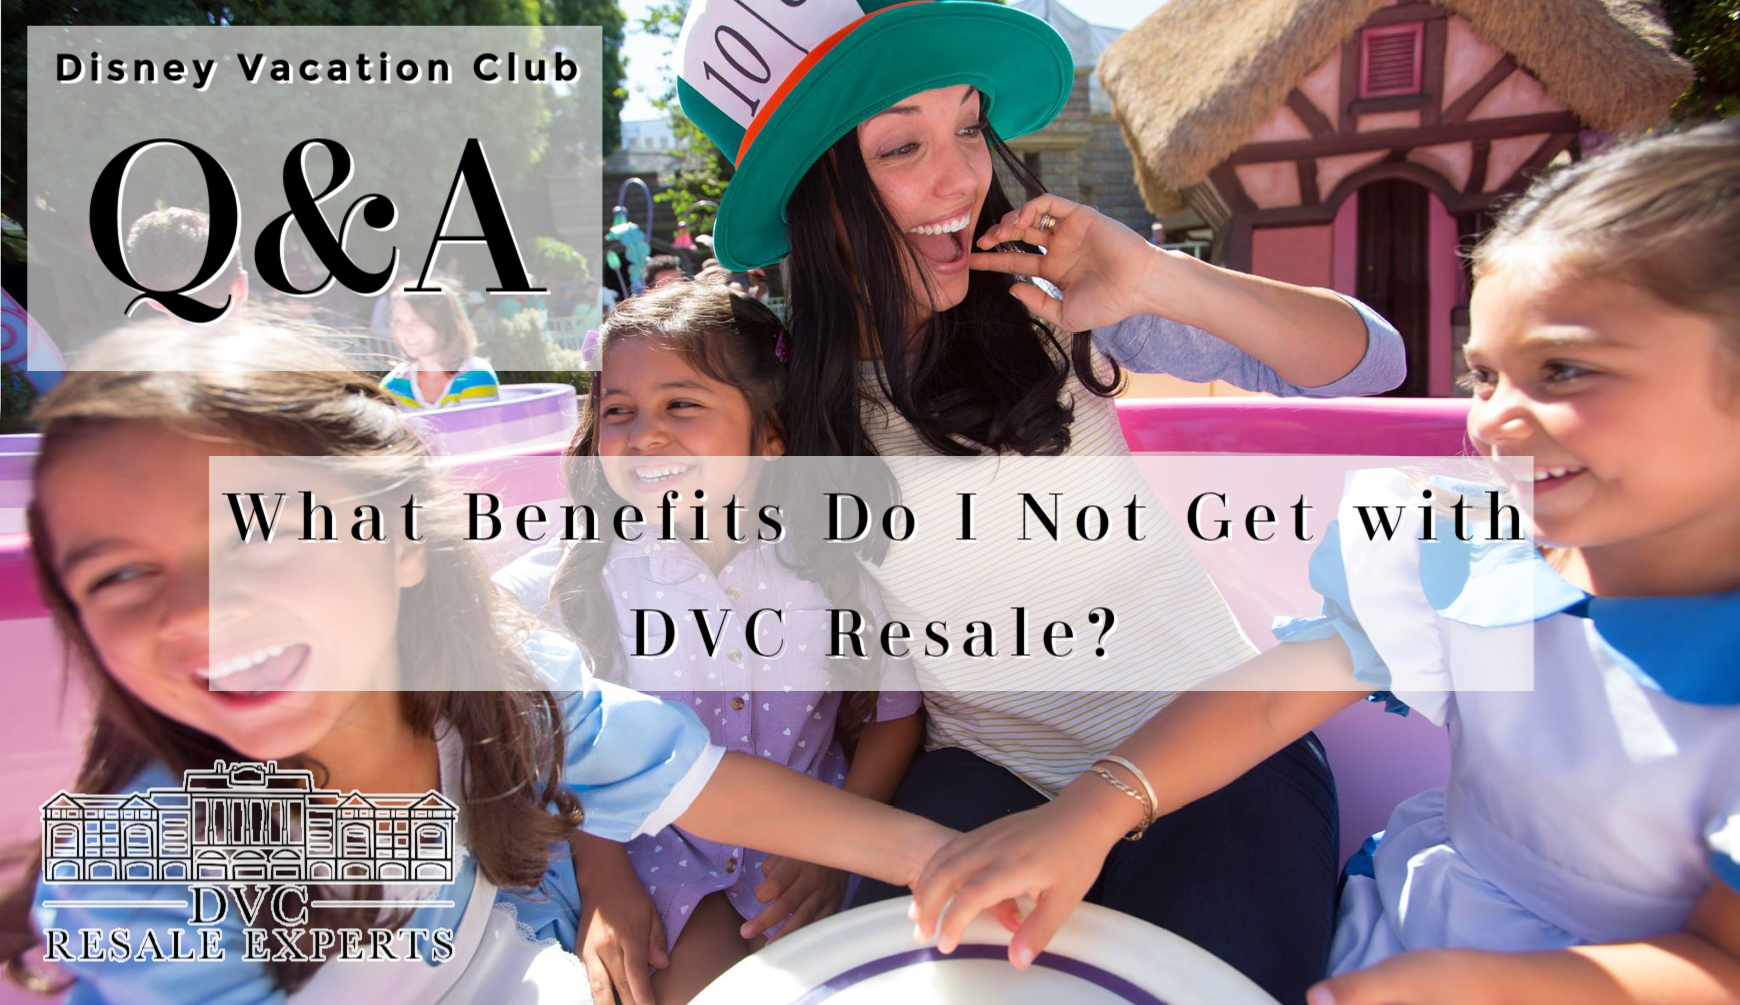 What Benefits Do I Not Get with DVC Resale